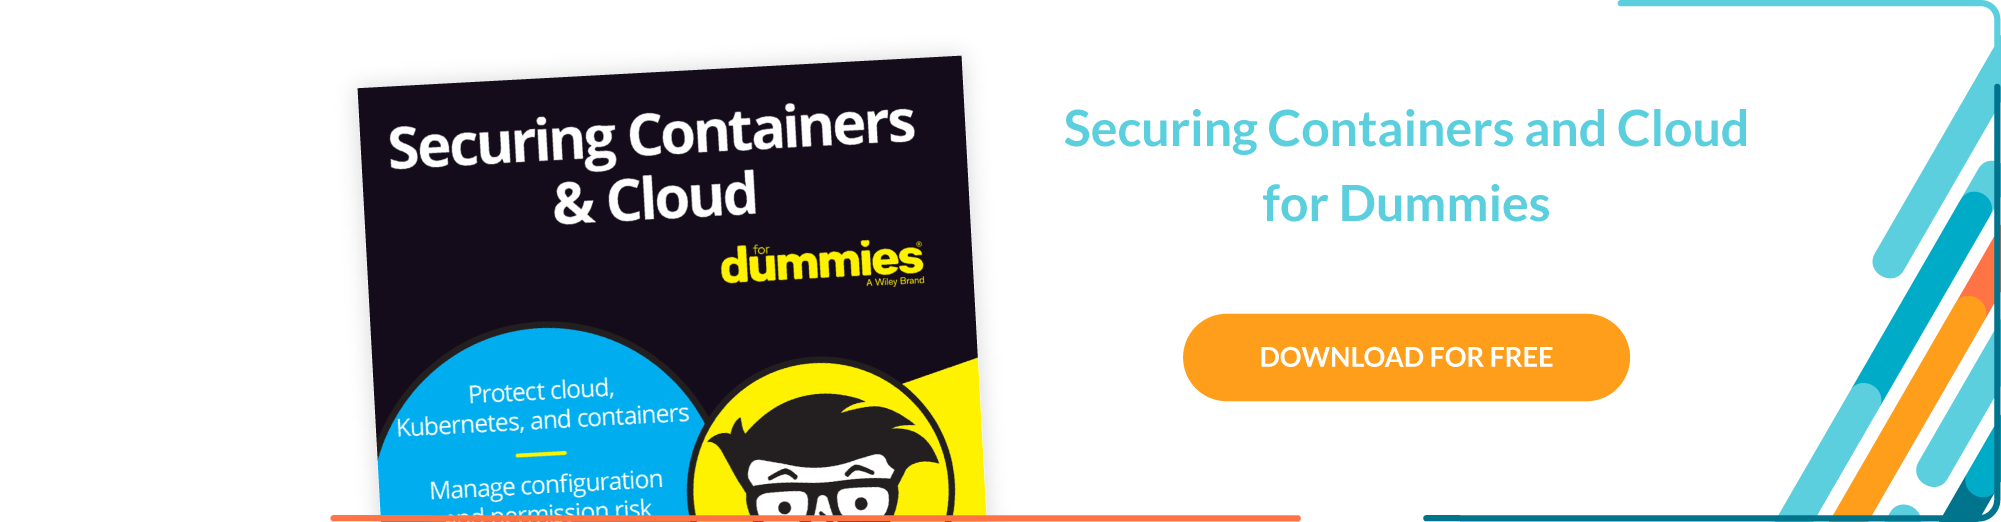 Securing containers and cloud for Dummies - Download now